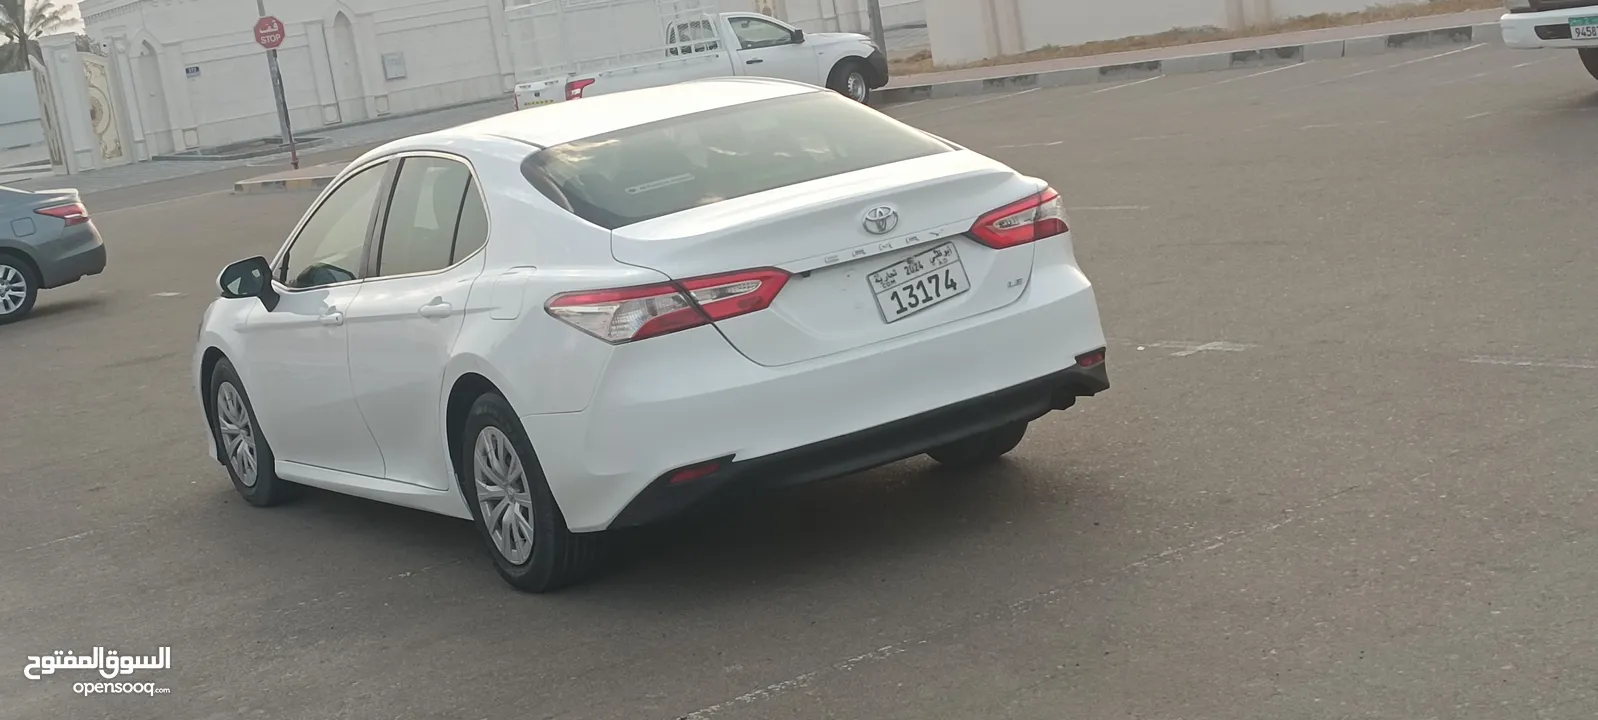 Toyota Camry model 2018 for sale GCC